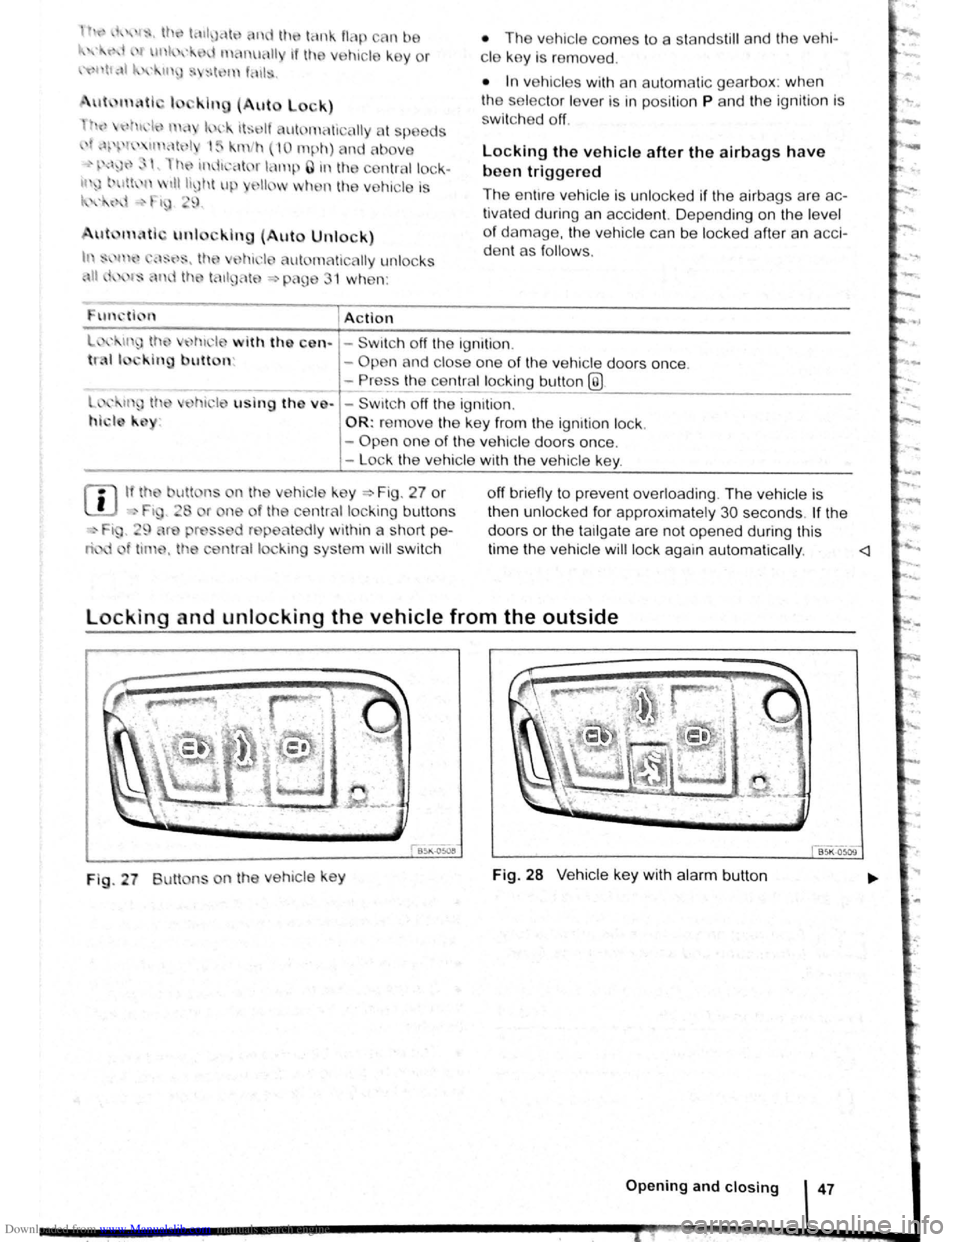 VOLKSWAGEN SCIROCCO 2008  Owners Manual Downloaded from www.Manualslib.com manuals search engine  h{ ,~ I,. U rl lC1tlJclt nd th tank flap cnn  be 
·  r 1 unhx I n tFinuHII if th e ve hic le k e y or 
"'~' tf,\1 1-. • "J